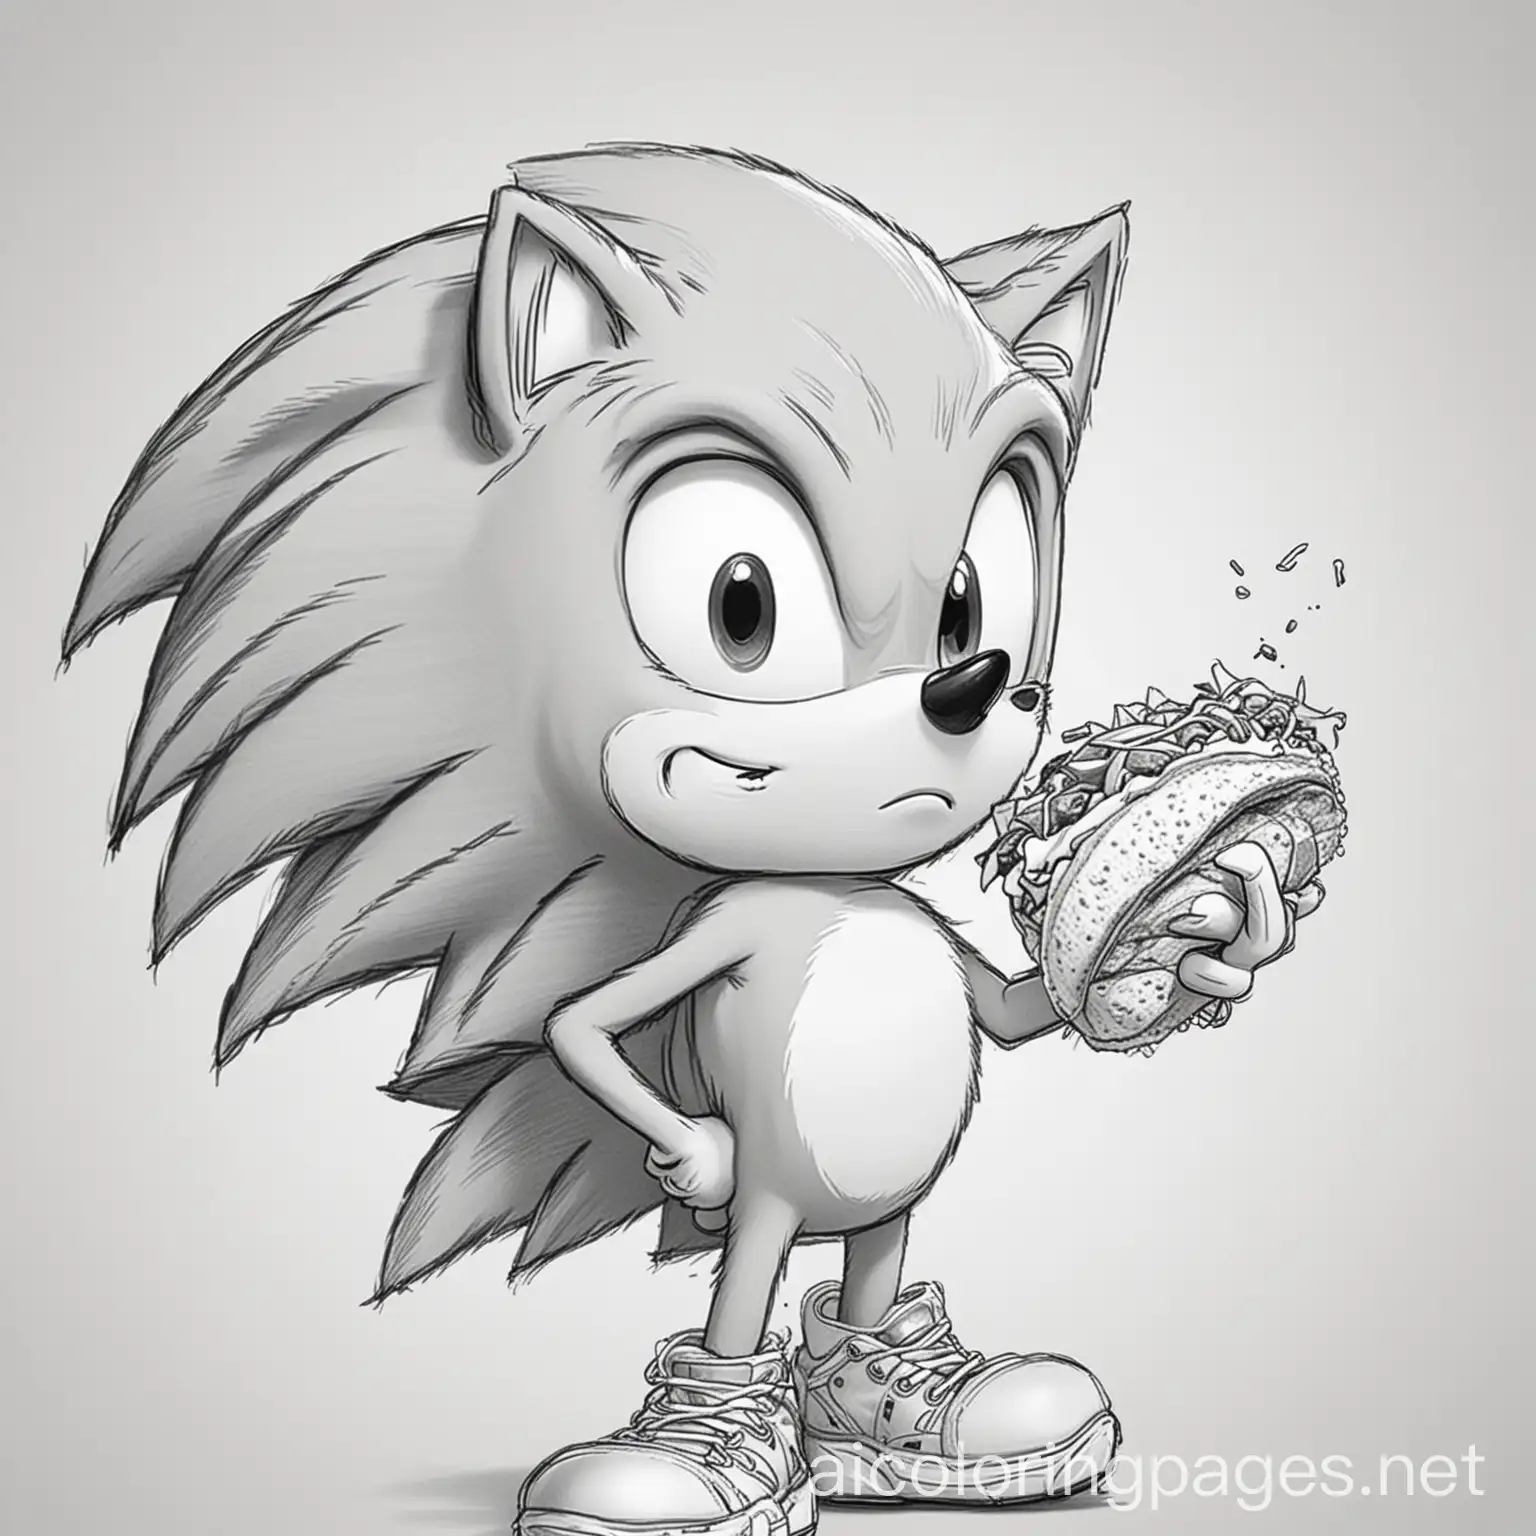 sonic eating a taco, Coloring Page, black and white, line art, white background, Simplicity, Ample White Space. The background of the coloring page is plain white to make it easy for young children to color within the lines. The outlines of all the subjects are easy to distinguish, making it simple for kids to color without too much difficulty